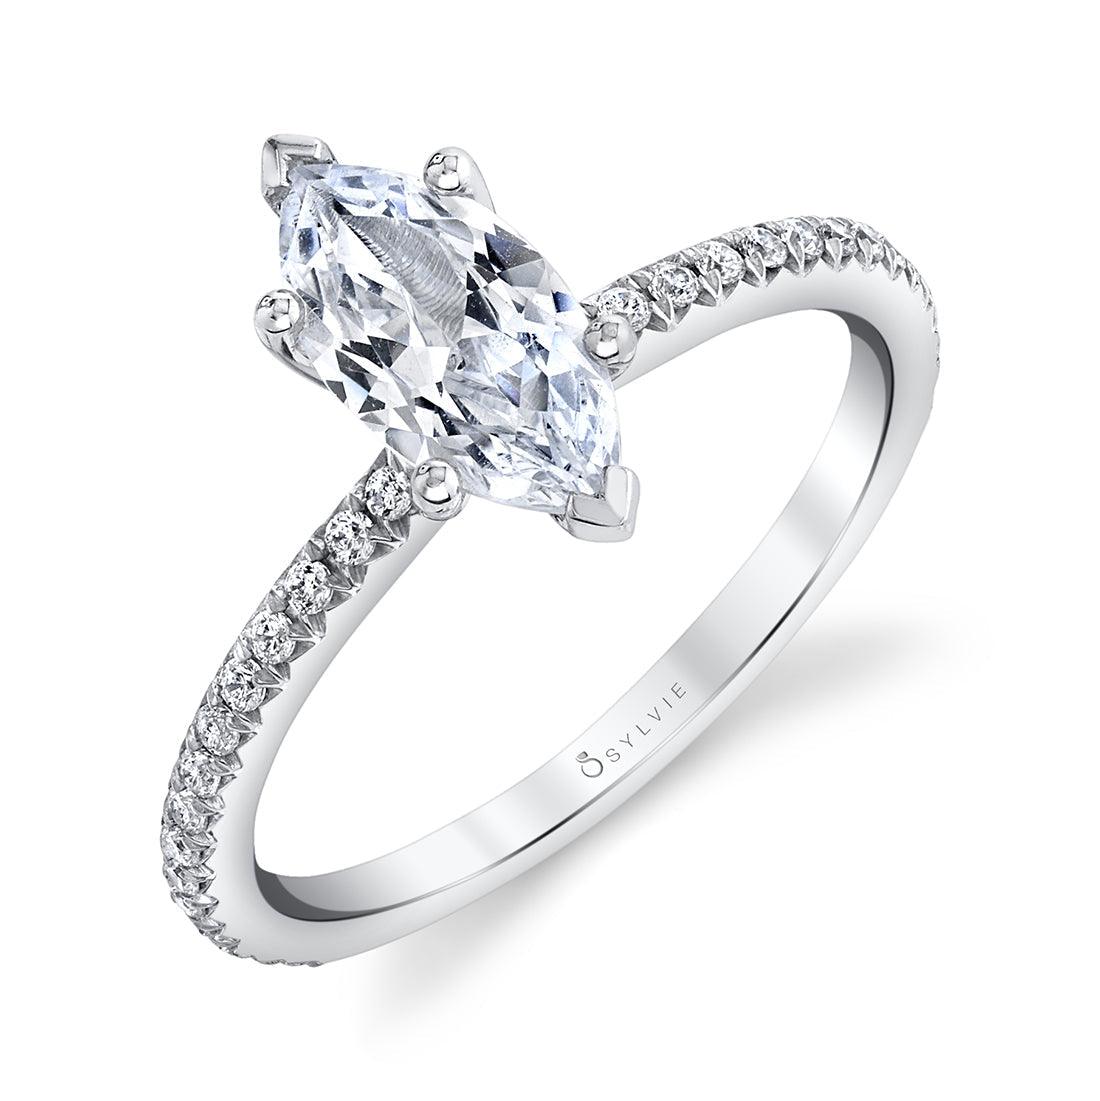  Adorlee Marquise Engagement Ring